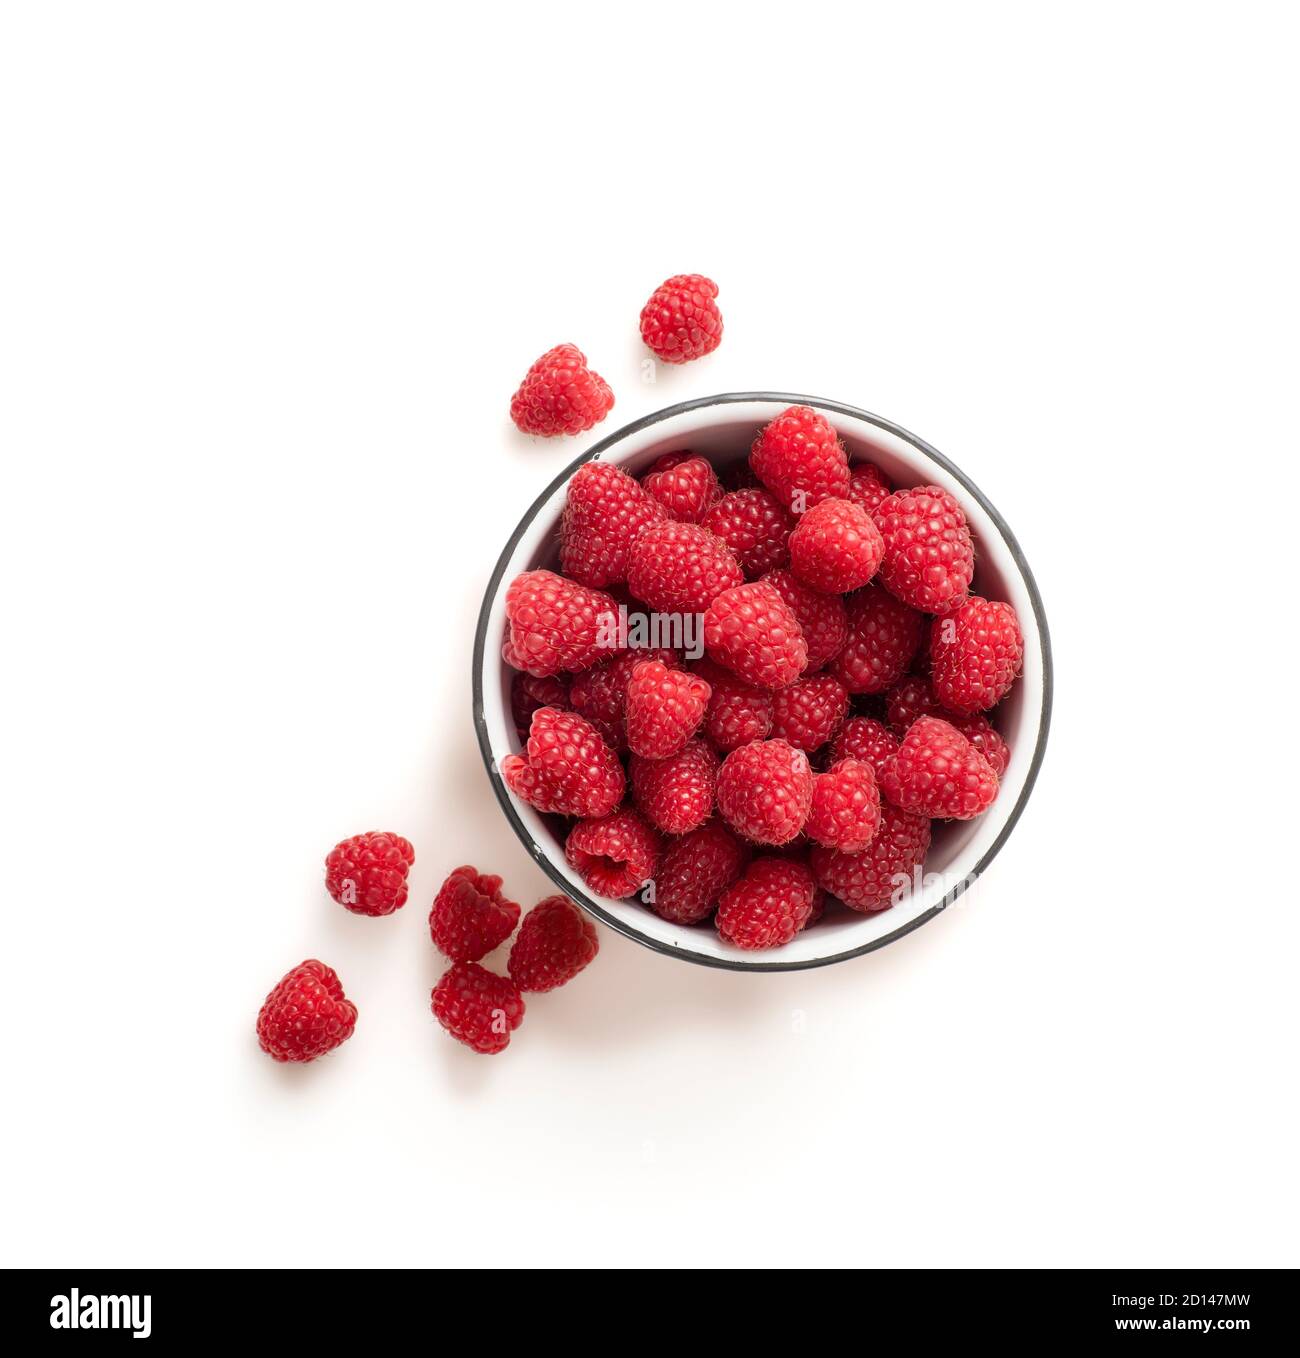 Lots of raspberries in a bowl placed on white, shiny background. Some berries are placed on the surface outsiden the bowl. Picture is shot from above. Stock Photo